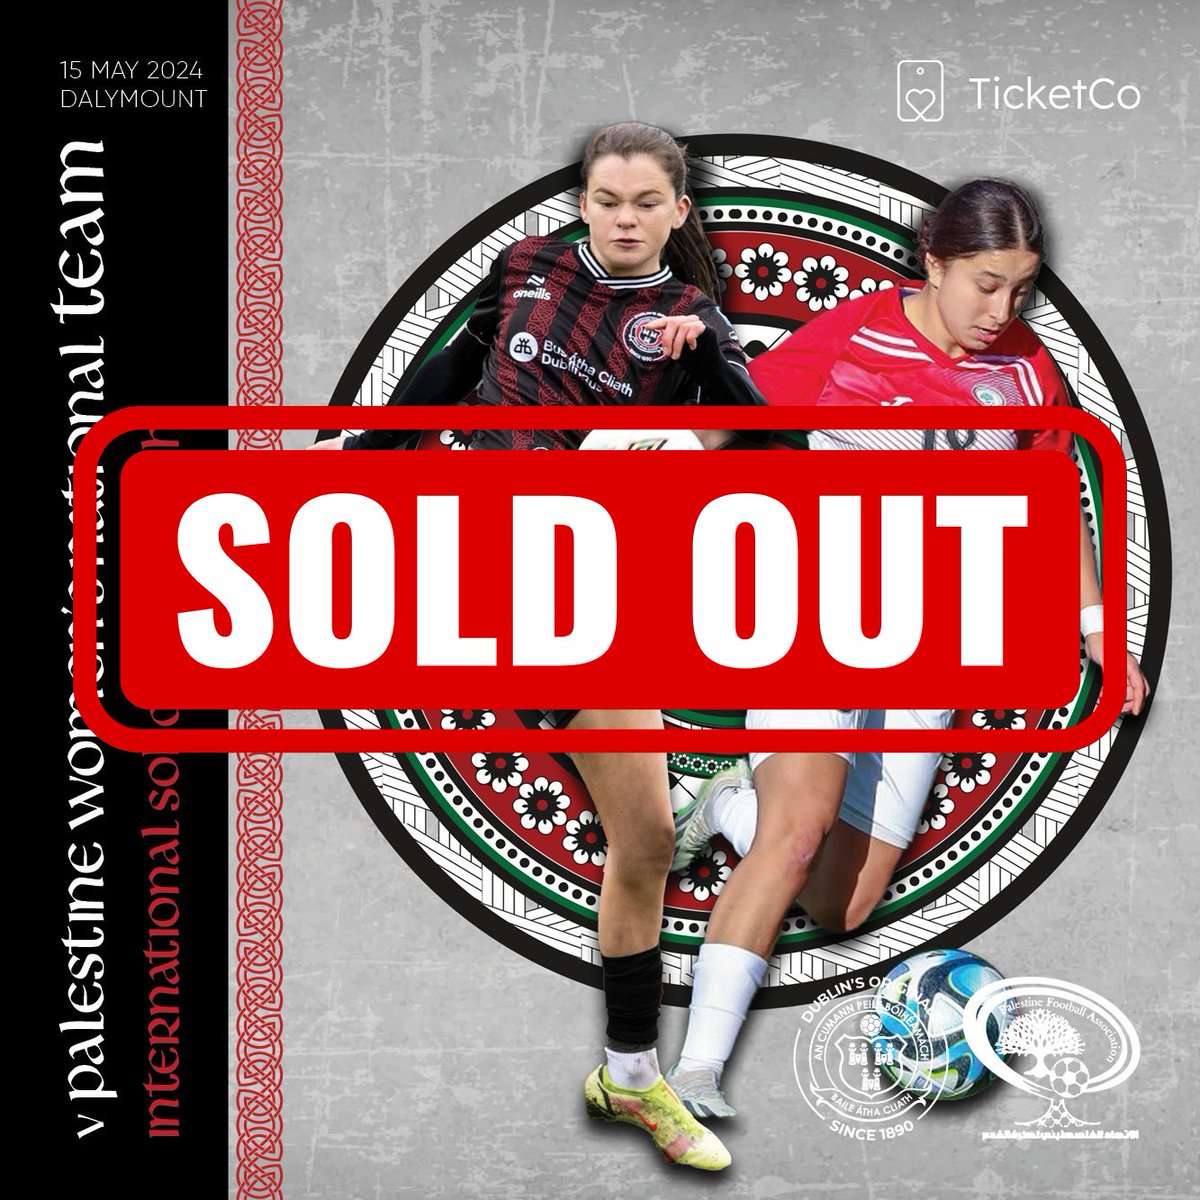 Bohemian FC v Palestine is now completely SOLD OUT. If you still wish to show your support and help raise vital humanitarian funds you can do so in two ways: 1. Buy a non-attendance ticket: bohemianfc.ticketco.events/ie/ie/e/donati… 2. Buy a live stream of the game: loitv.ie/en-int/video/v……